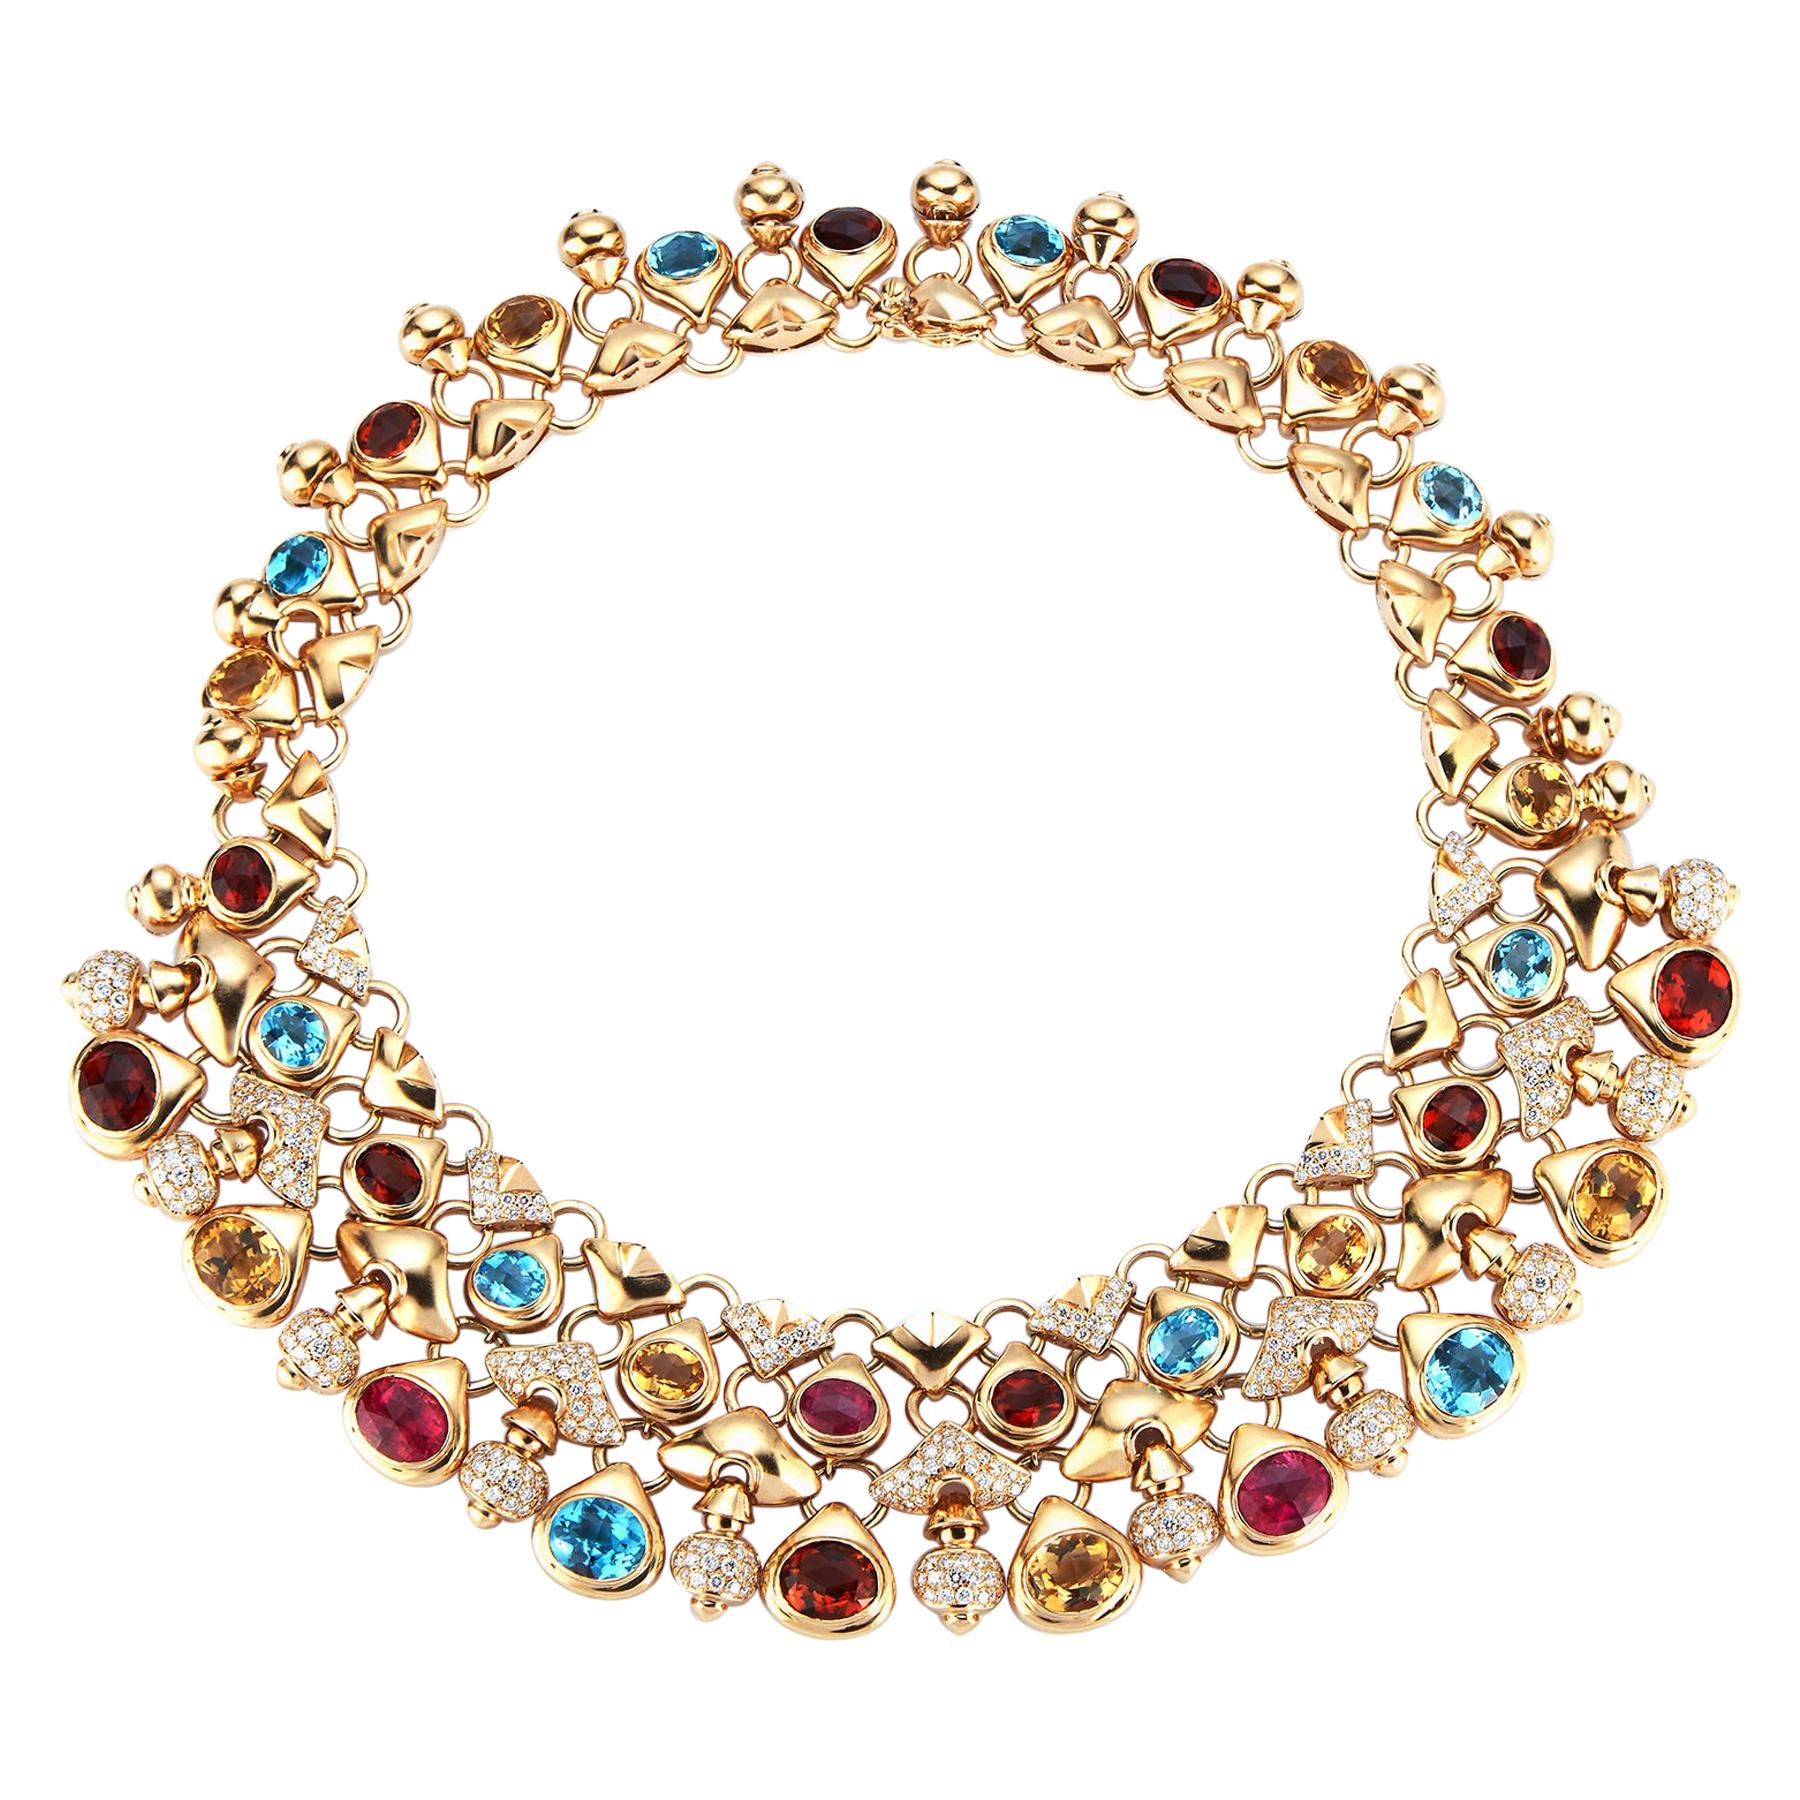 Impressive Multi Gem and Diamond Gold Necklace by Moussaieff